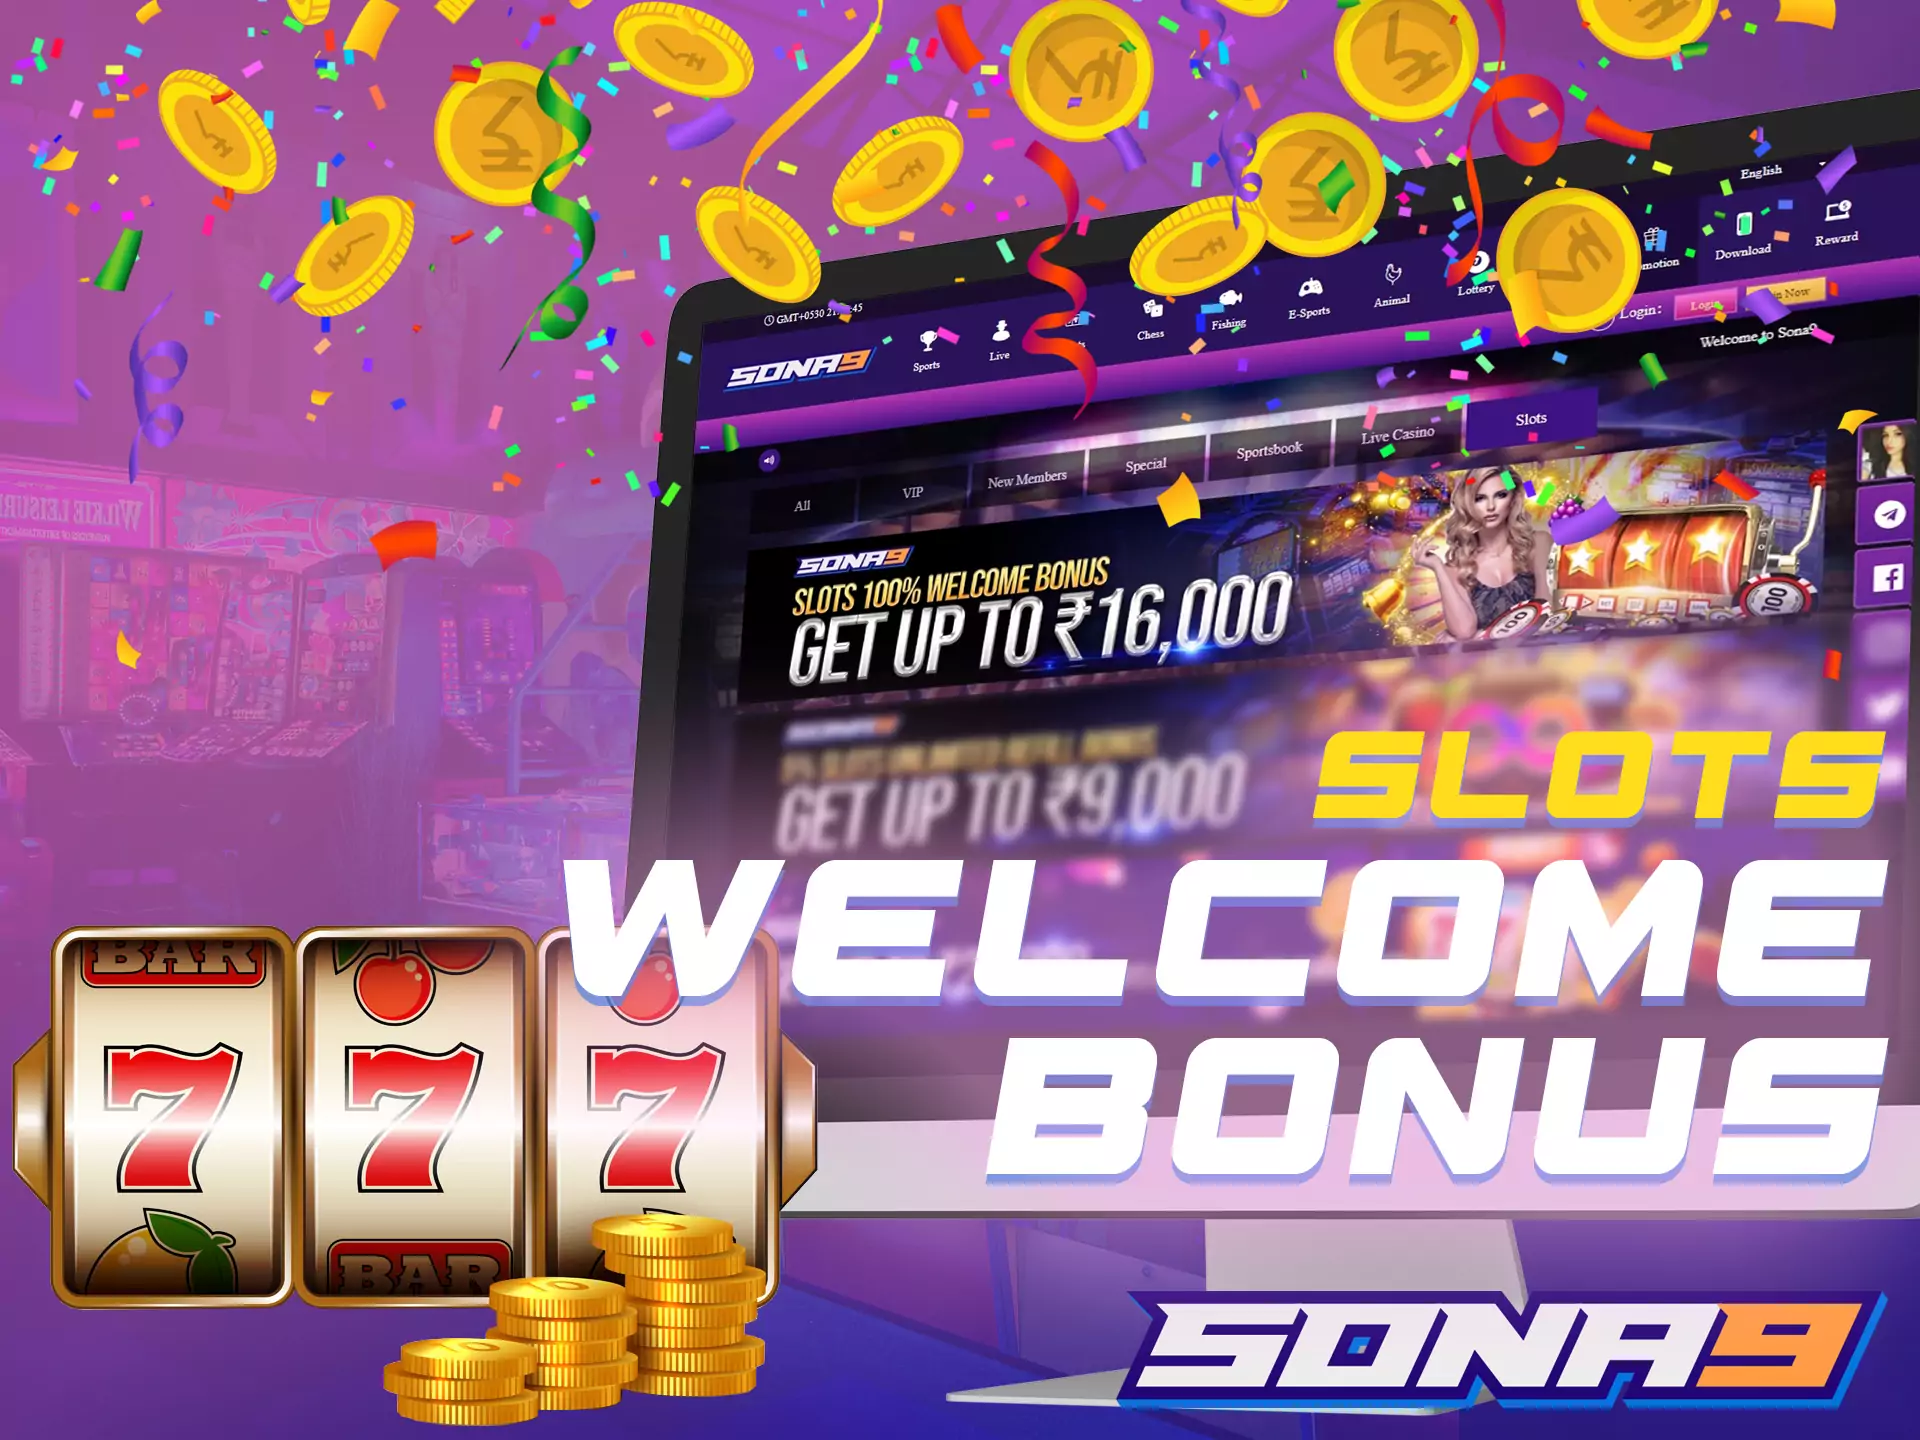 For playing slots, use the bonus from Sona9.